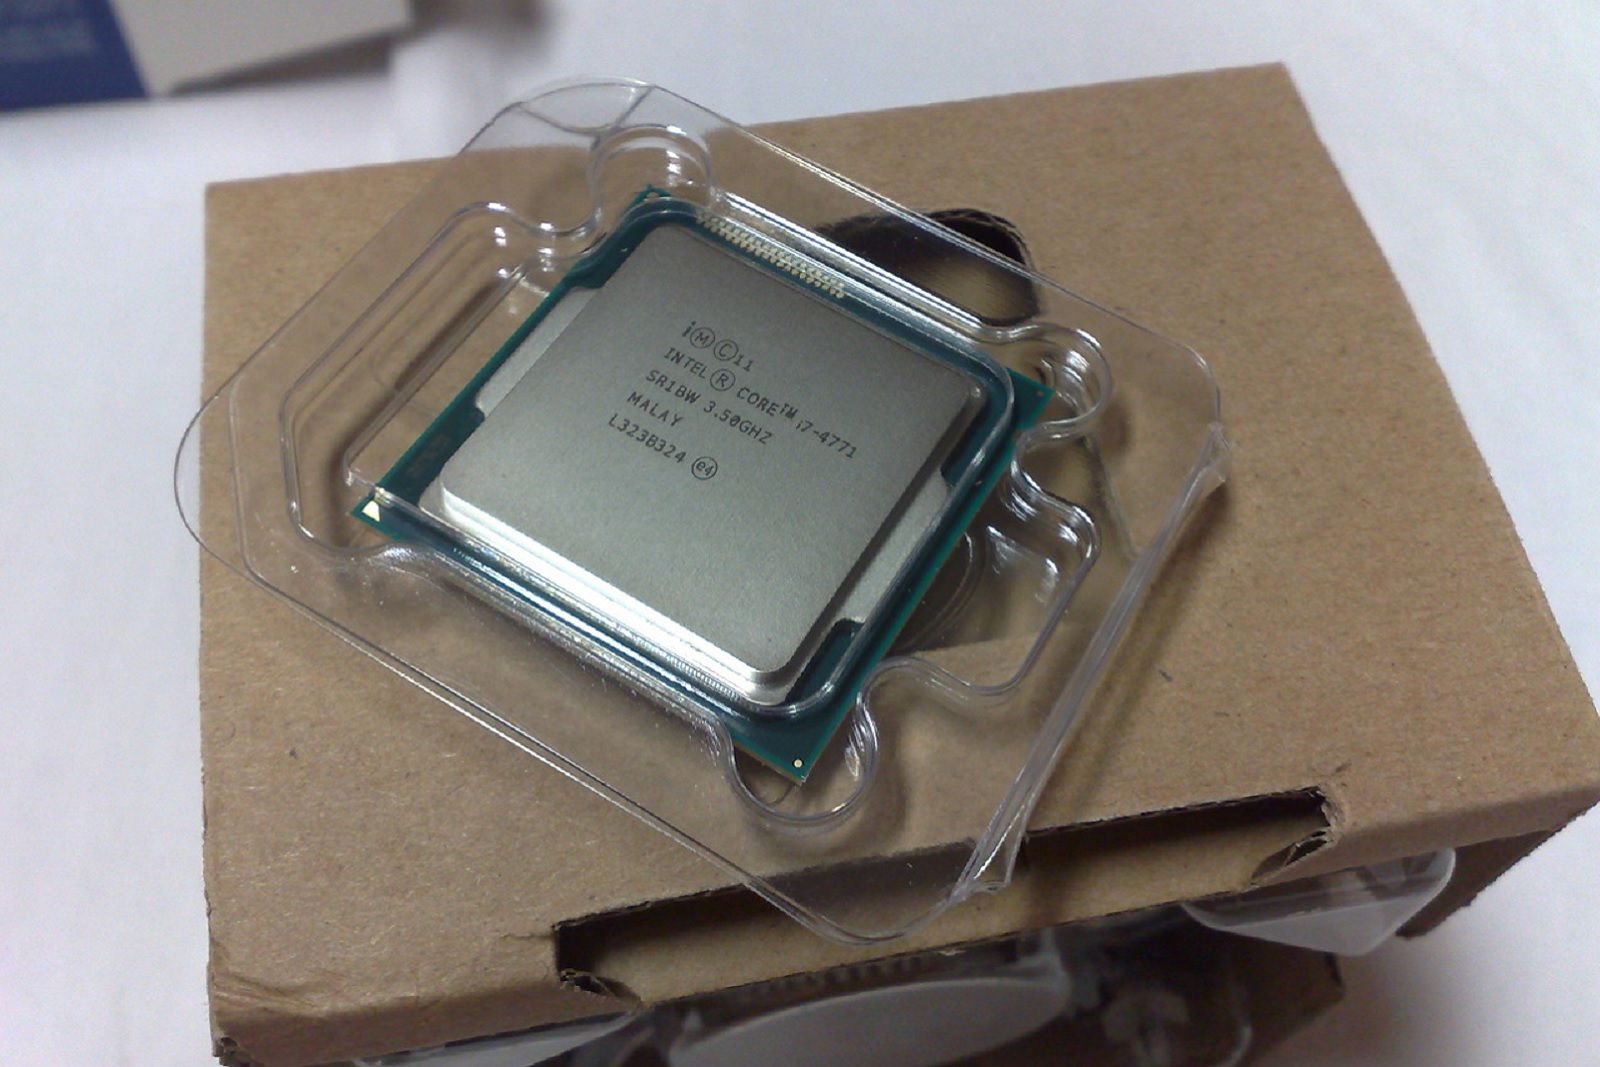 Intel's first CPU is 50 years old and processors have come a long way since photo 13